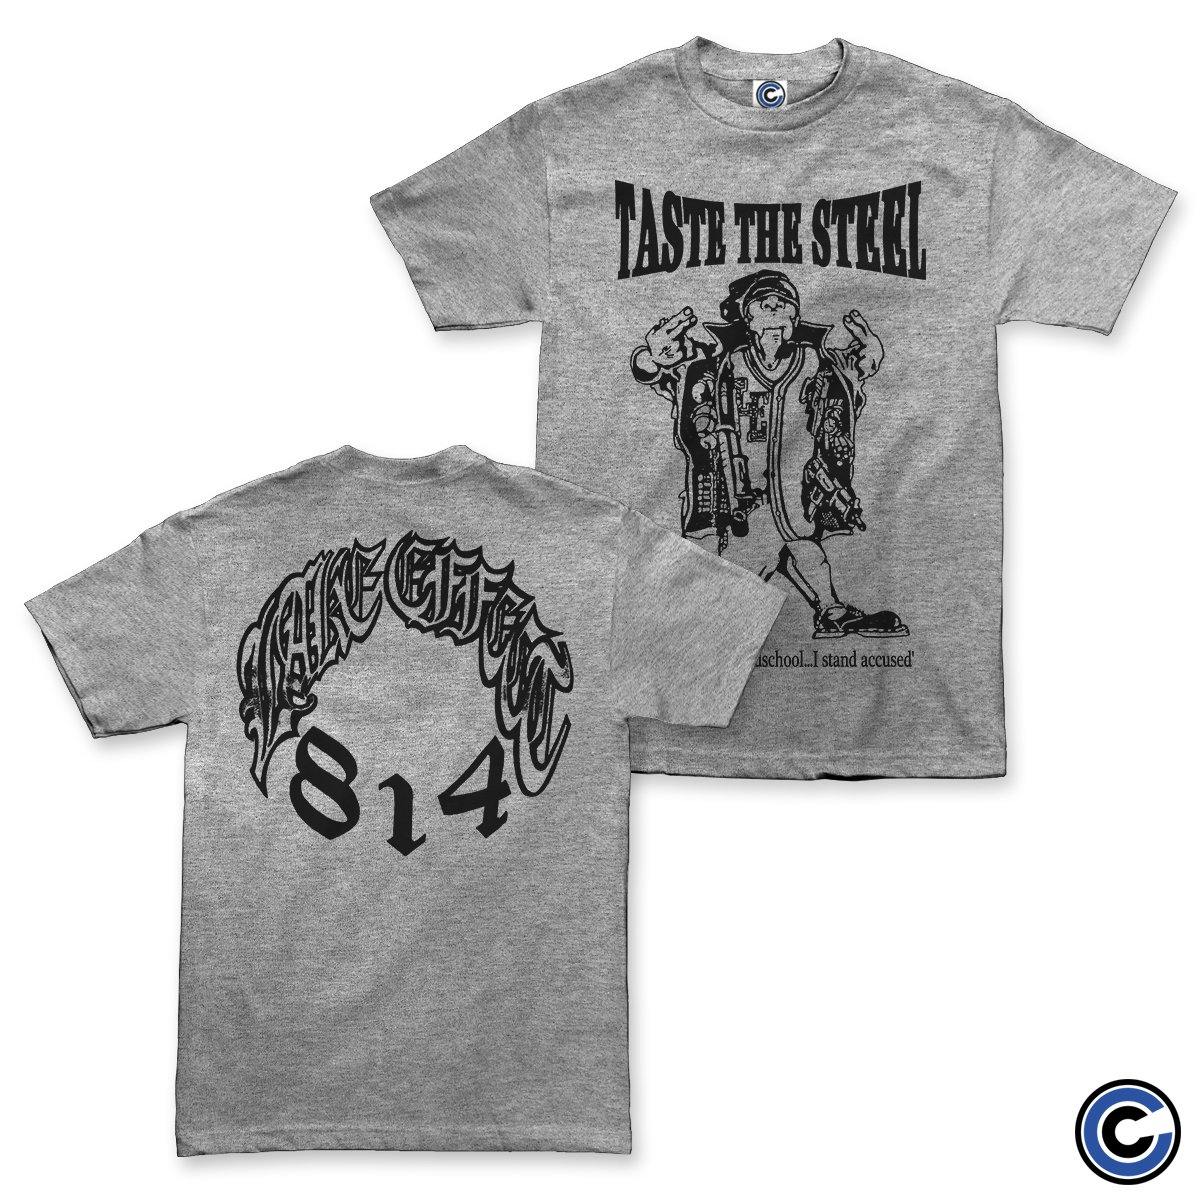 Buy – Taste the Steel "In Defense" Shirt – Band & Music Merch – Cold Cuts Merch